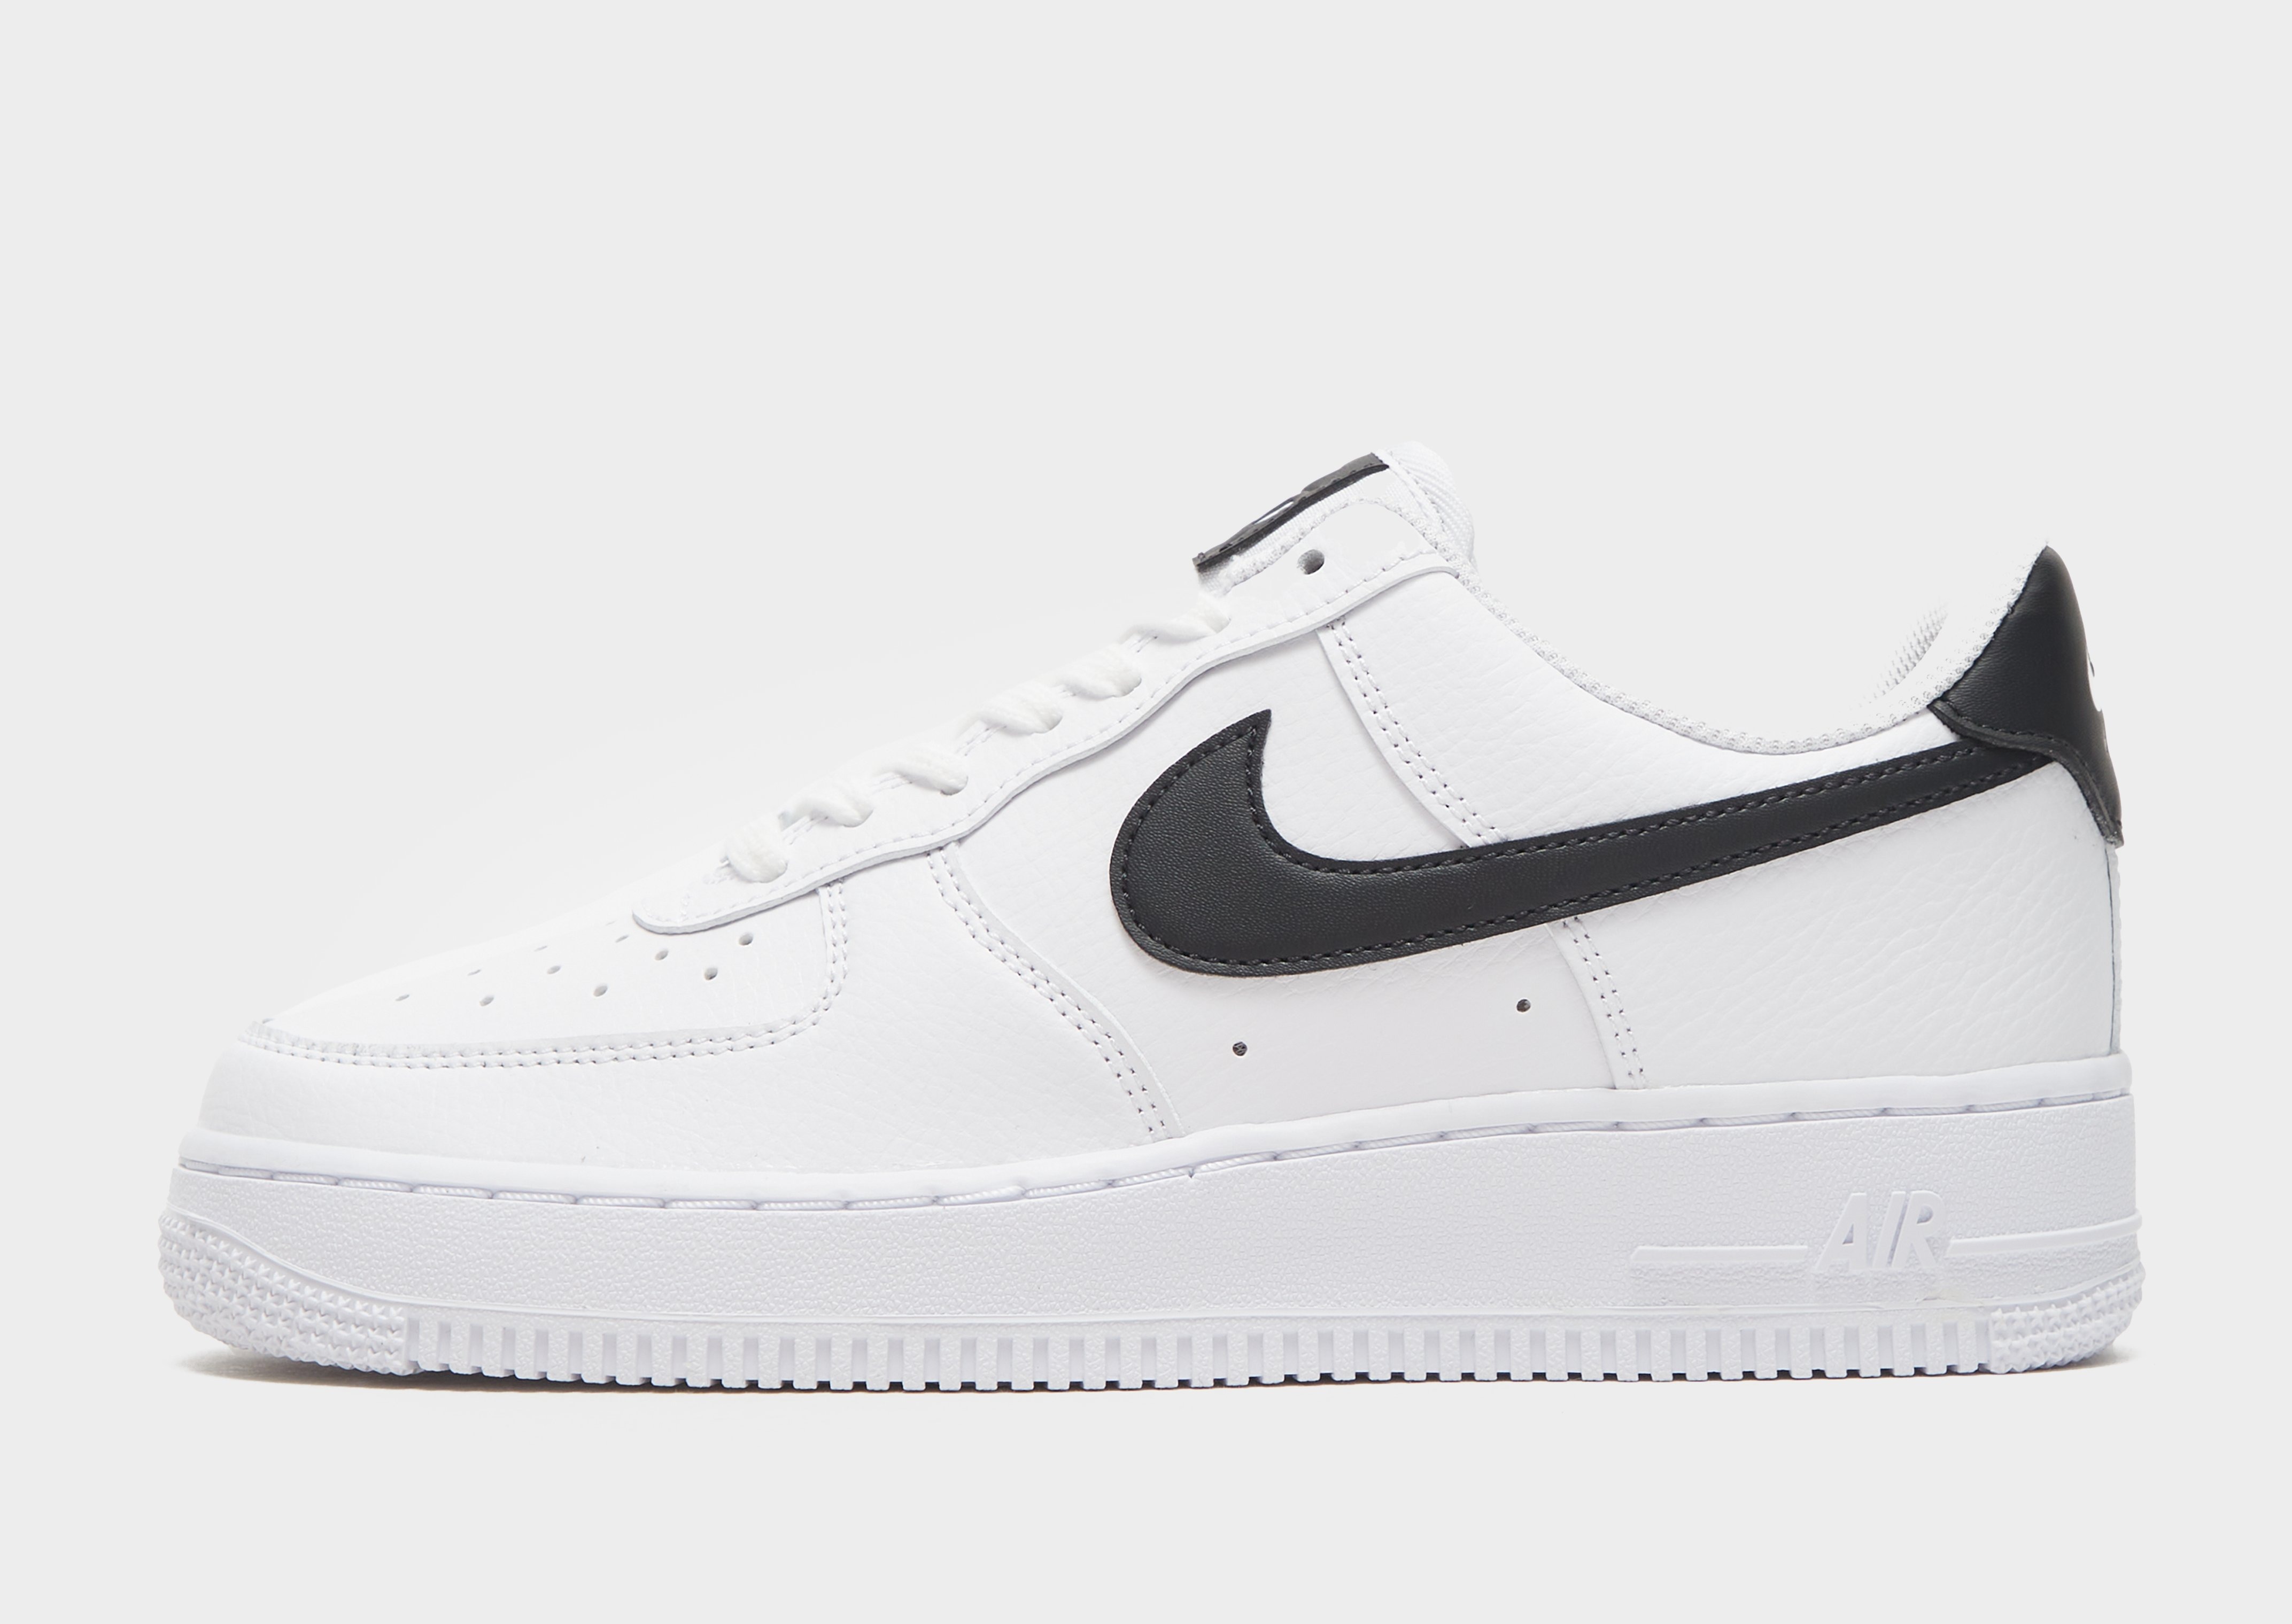 Nike Chaussure Nike Air Force 1 '07 pour Femme Blanc- JD Sports France